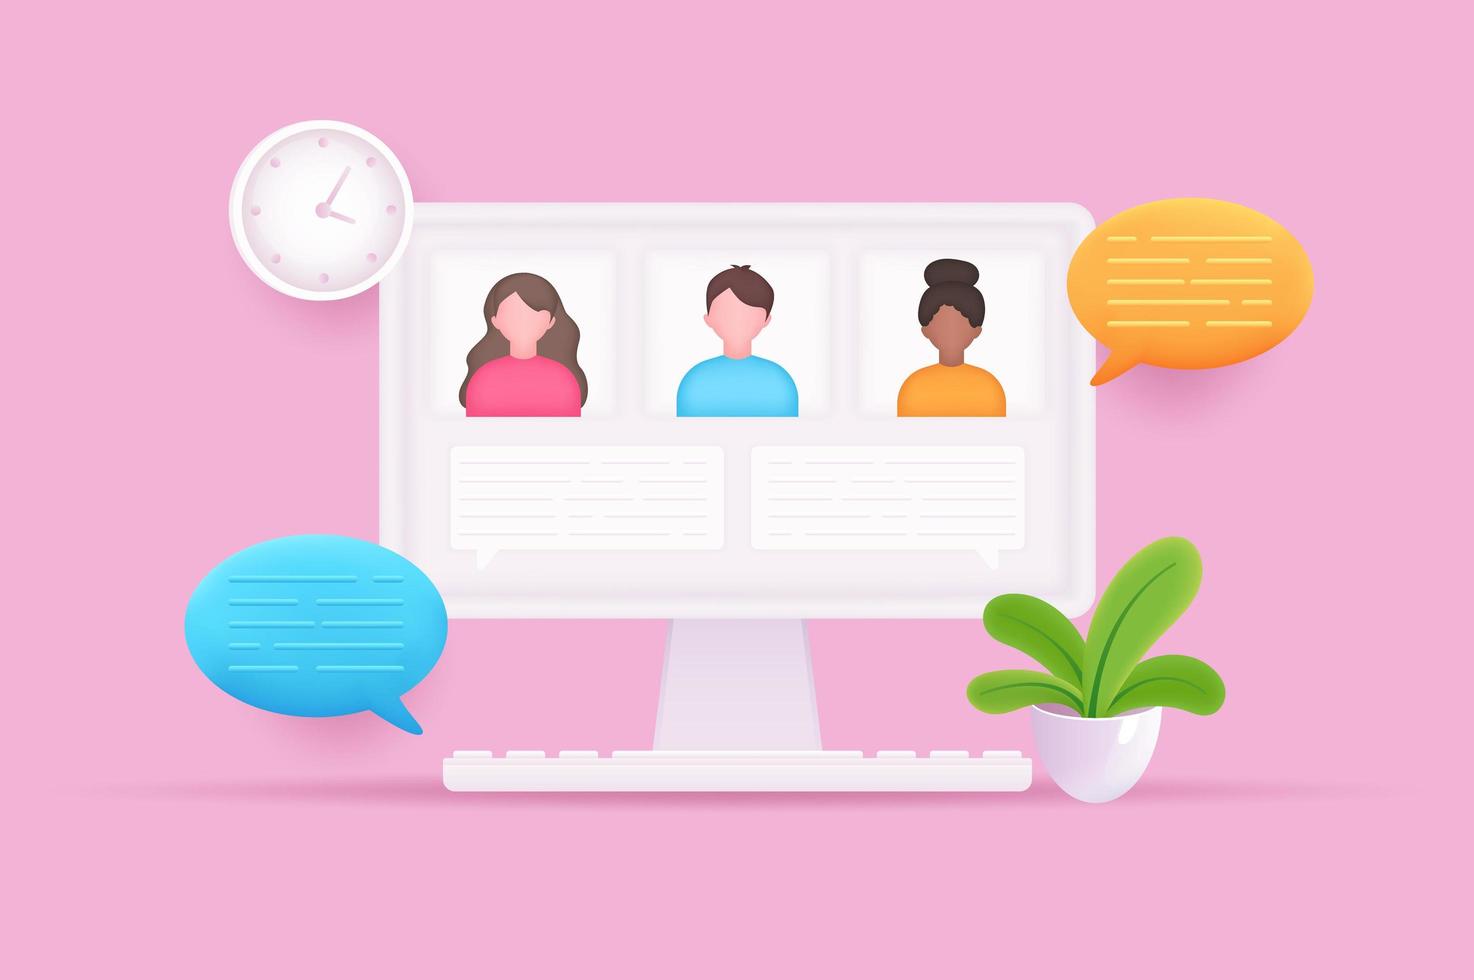 Video conference concept 3D illustration. Icon composition with people talking in online meeting at computer screen. Virtual chat with colleagues or friends. Vector illustration for modern web design